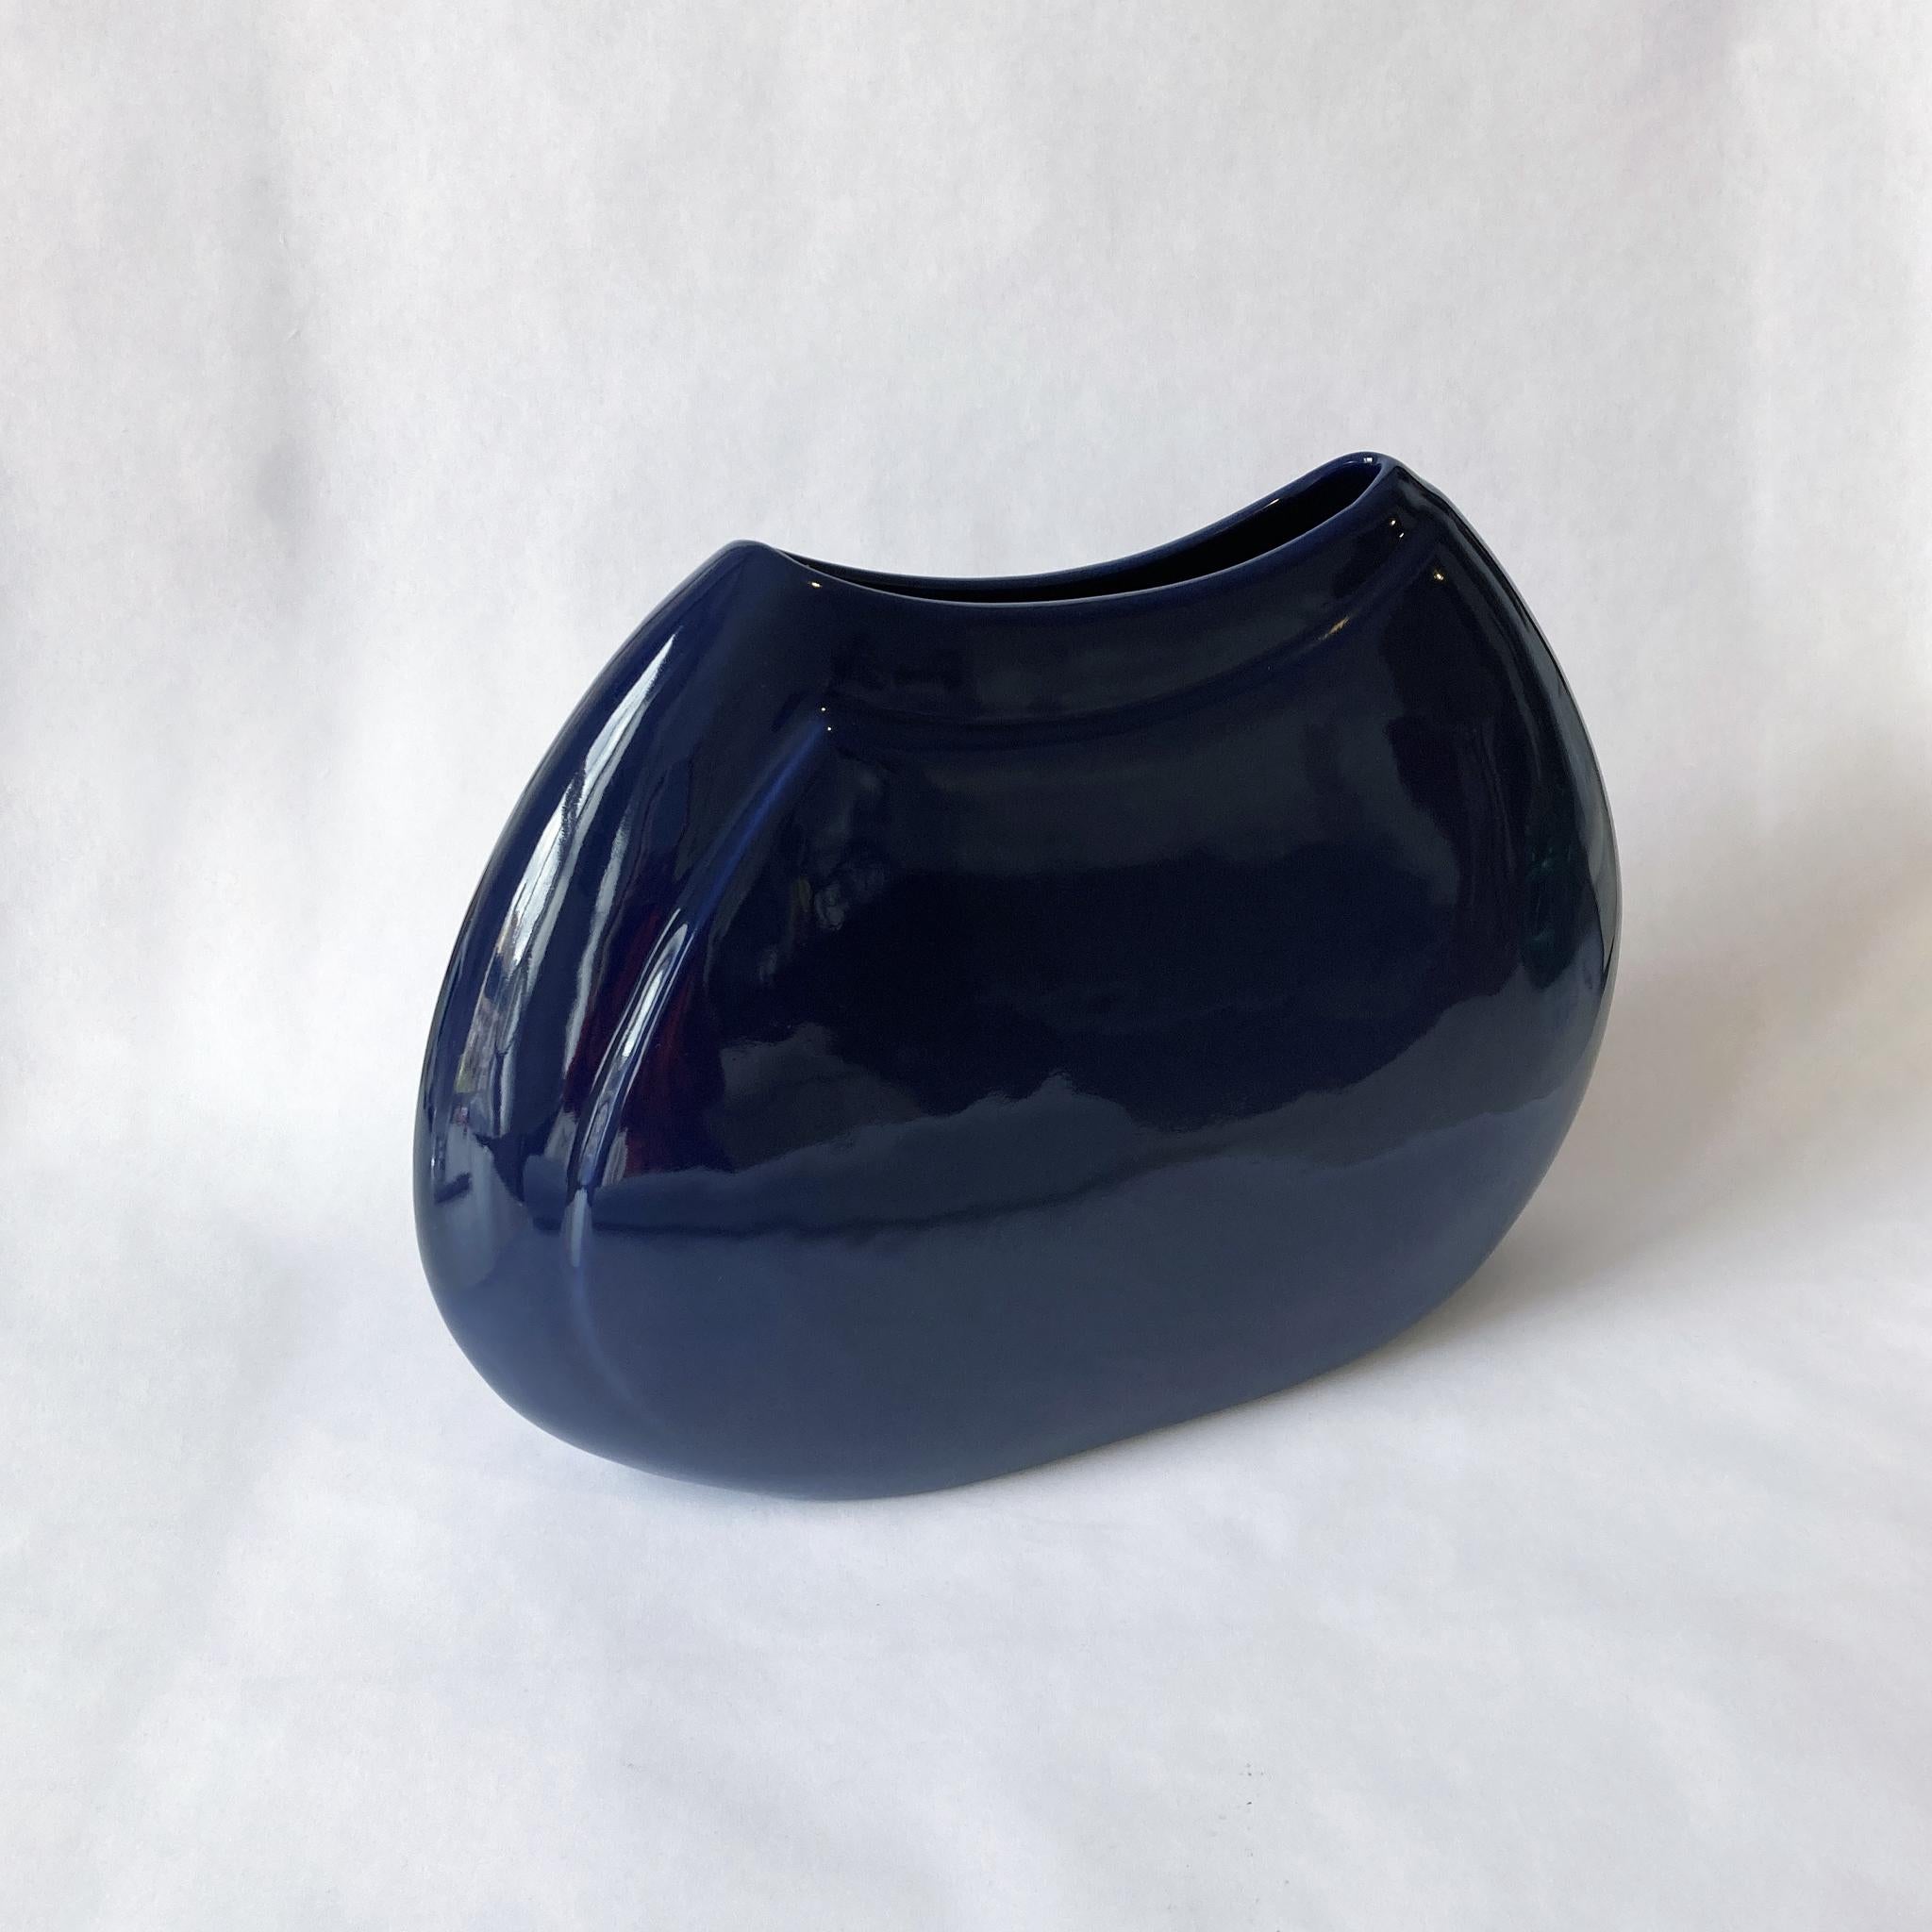 Postmodern Haeger navy blue vase, medium size. This piece has a wide front silhouette with a narrow depth, very striking. In great condition, no crazing, chips or cracks. Beautiful on its own, or paired with tonal pieces to form a group. See